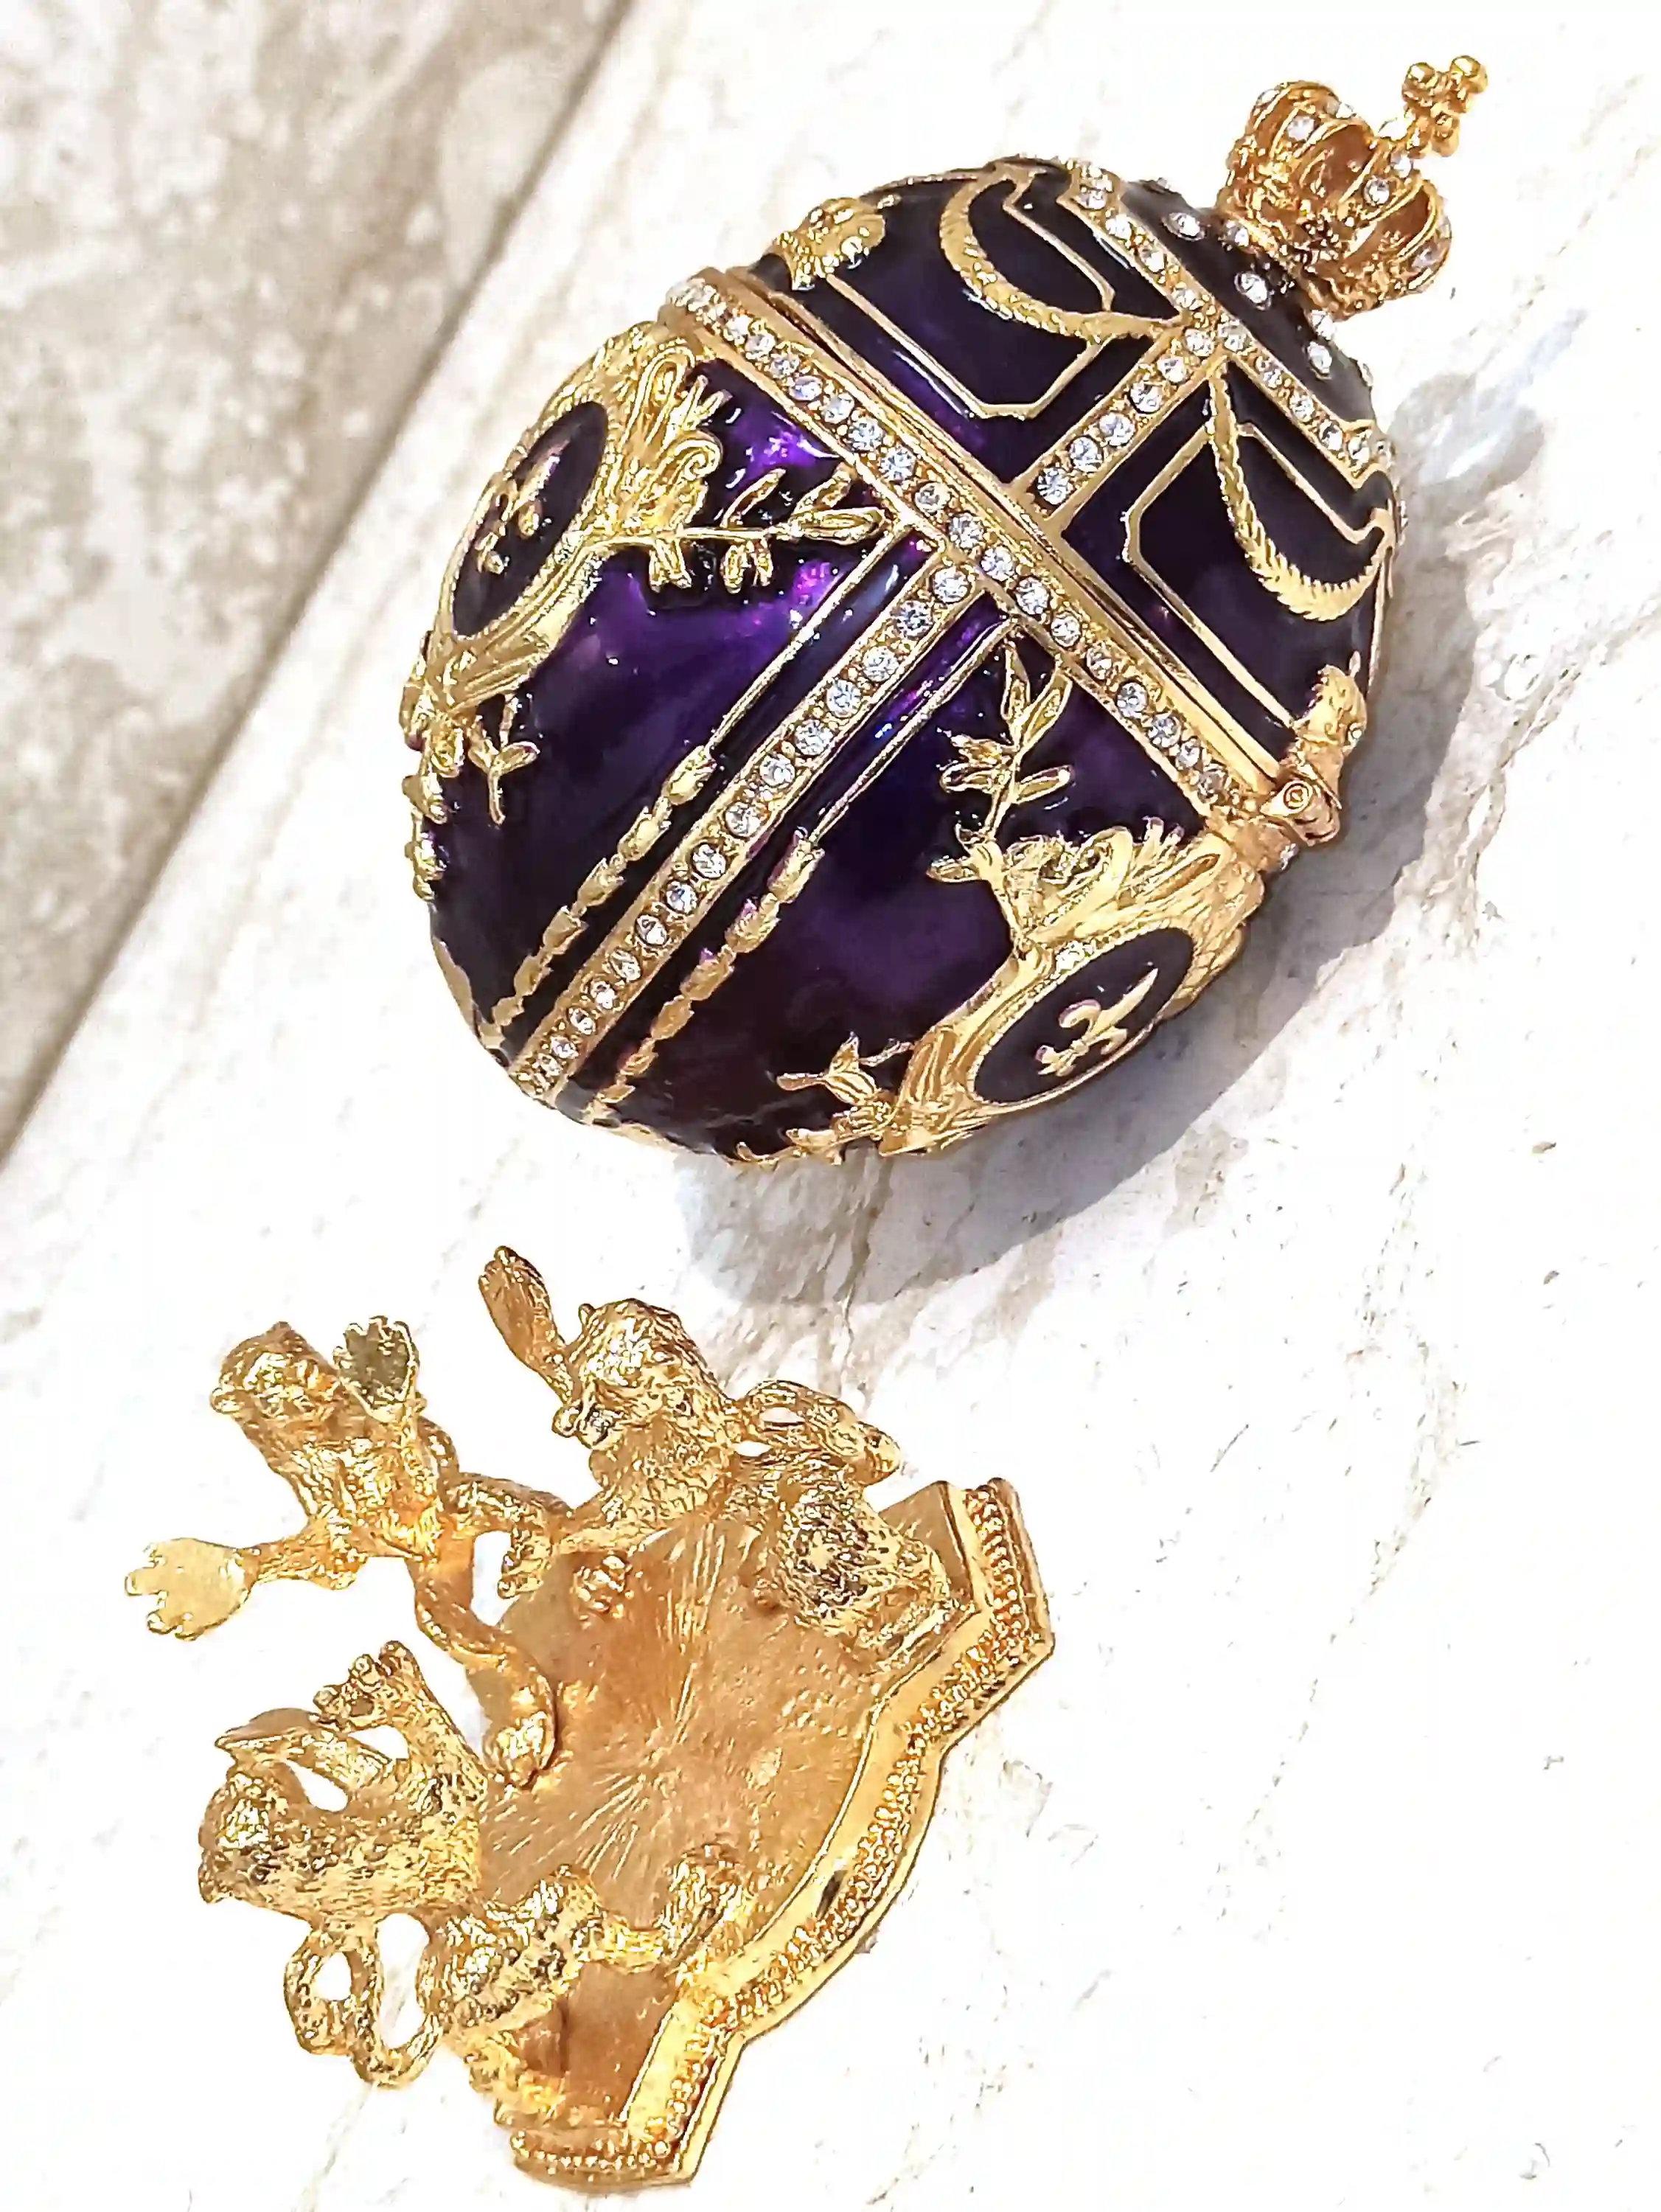 Royal Purple Faberge Egg style 24KGOLD 4ct Collectors Egg Fabrege Jewelry Box Faberge Egg Trinket Box HAND Decorated with 200 Austrian Crys 